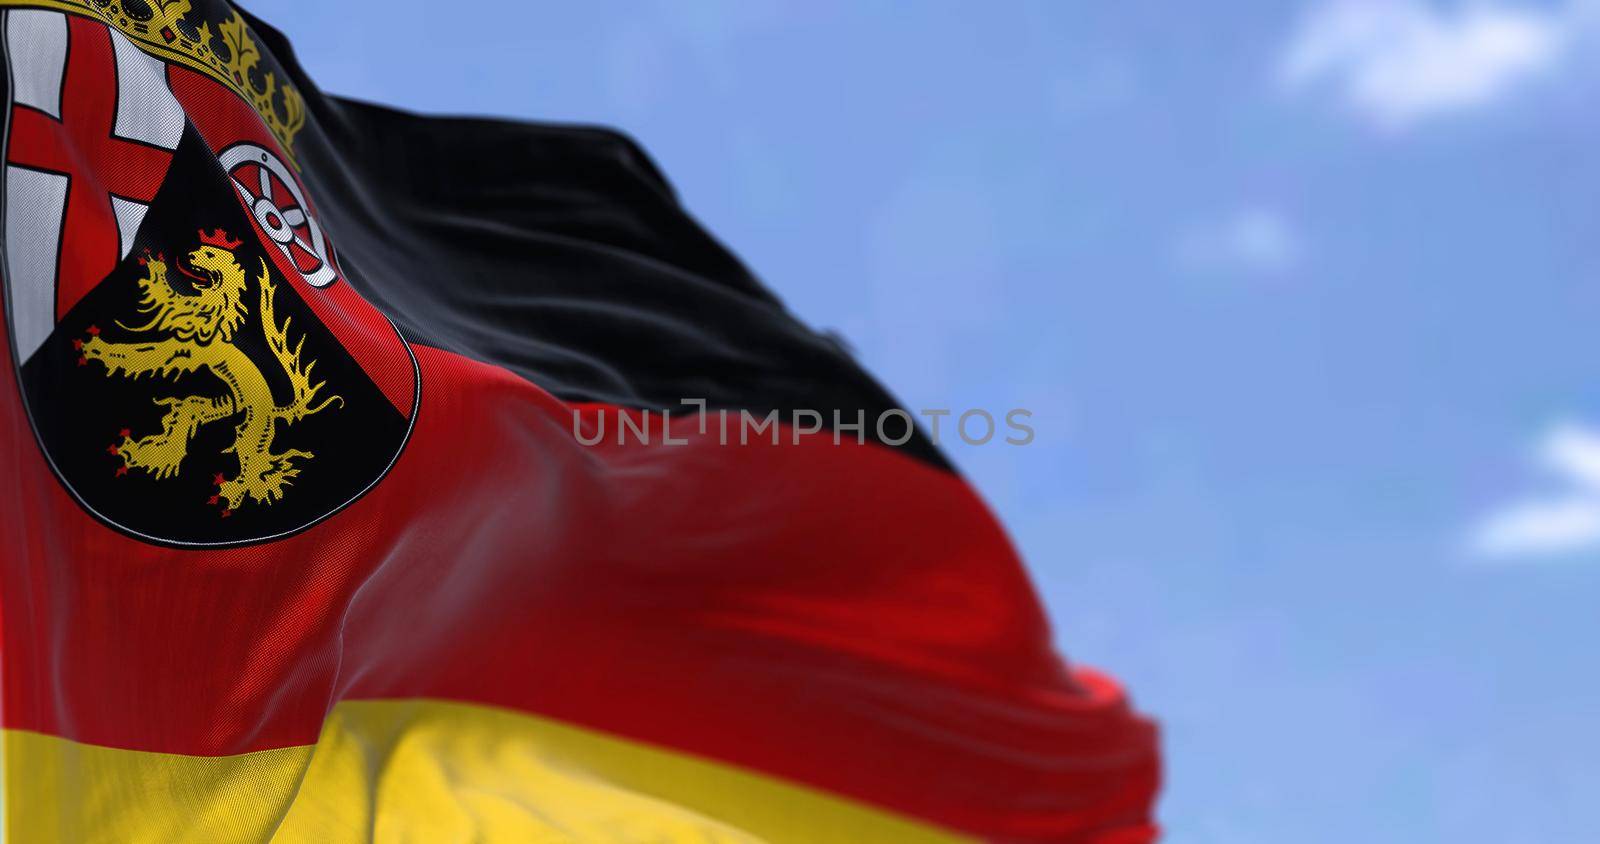 The flag of Rhineland-Palatinate waving in the wind on a clear day. Rhineland-Palatinate is a German state (Land) situated in western Germany